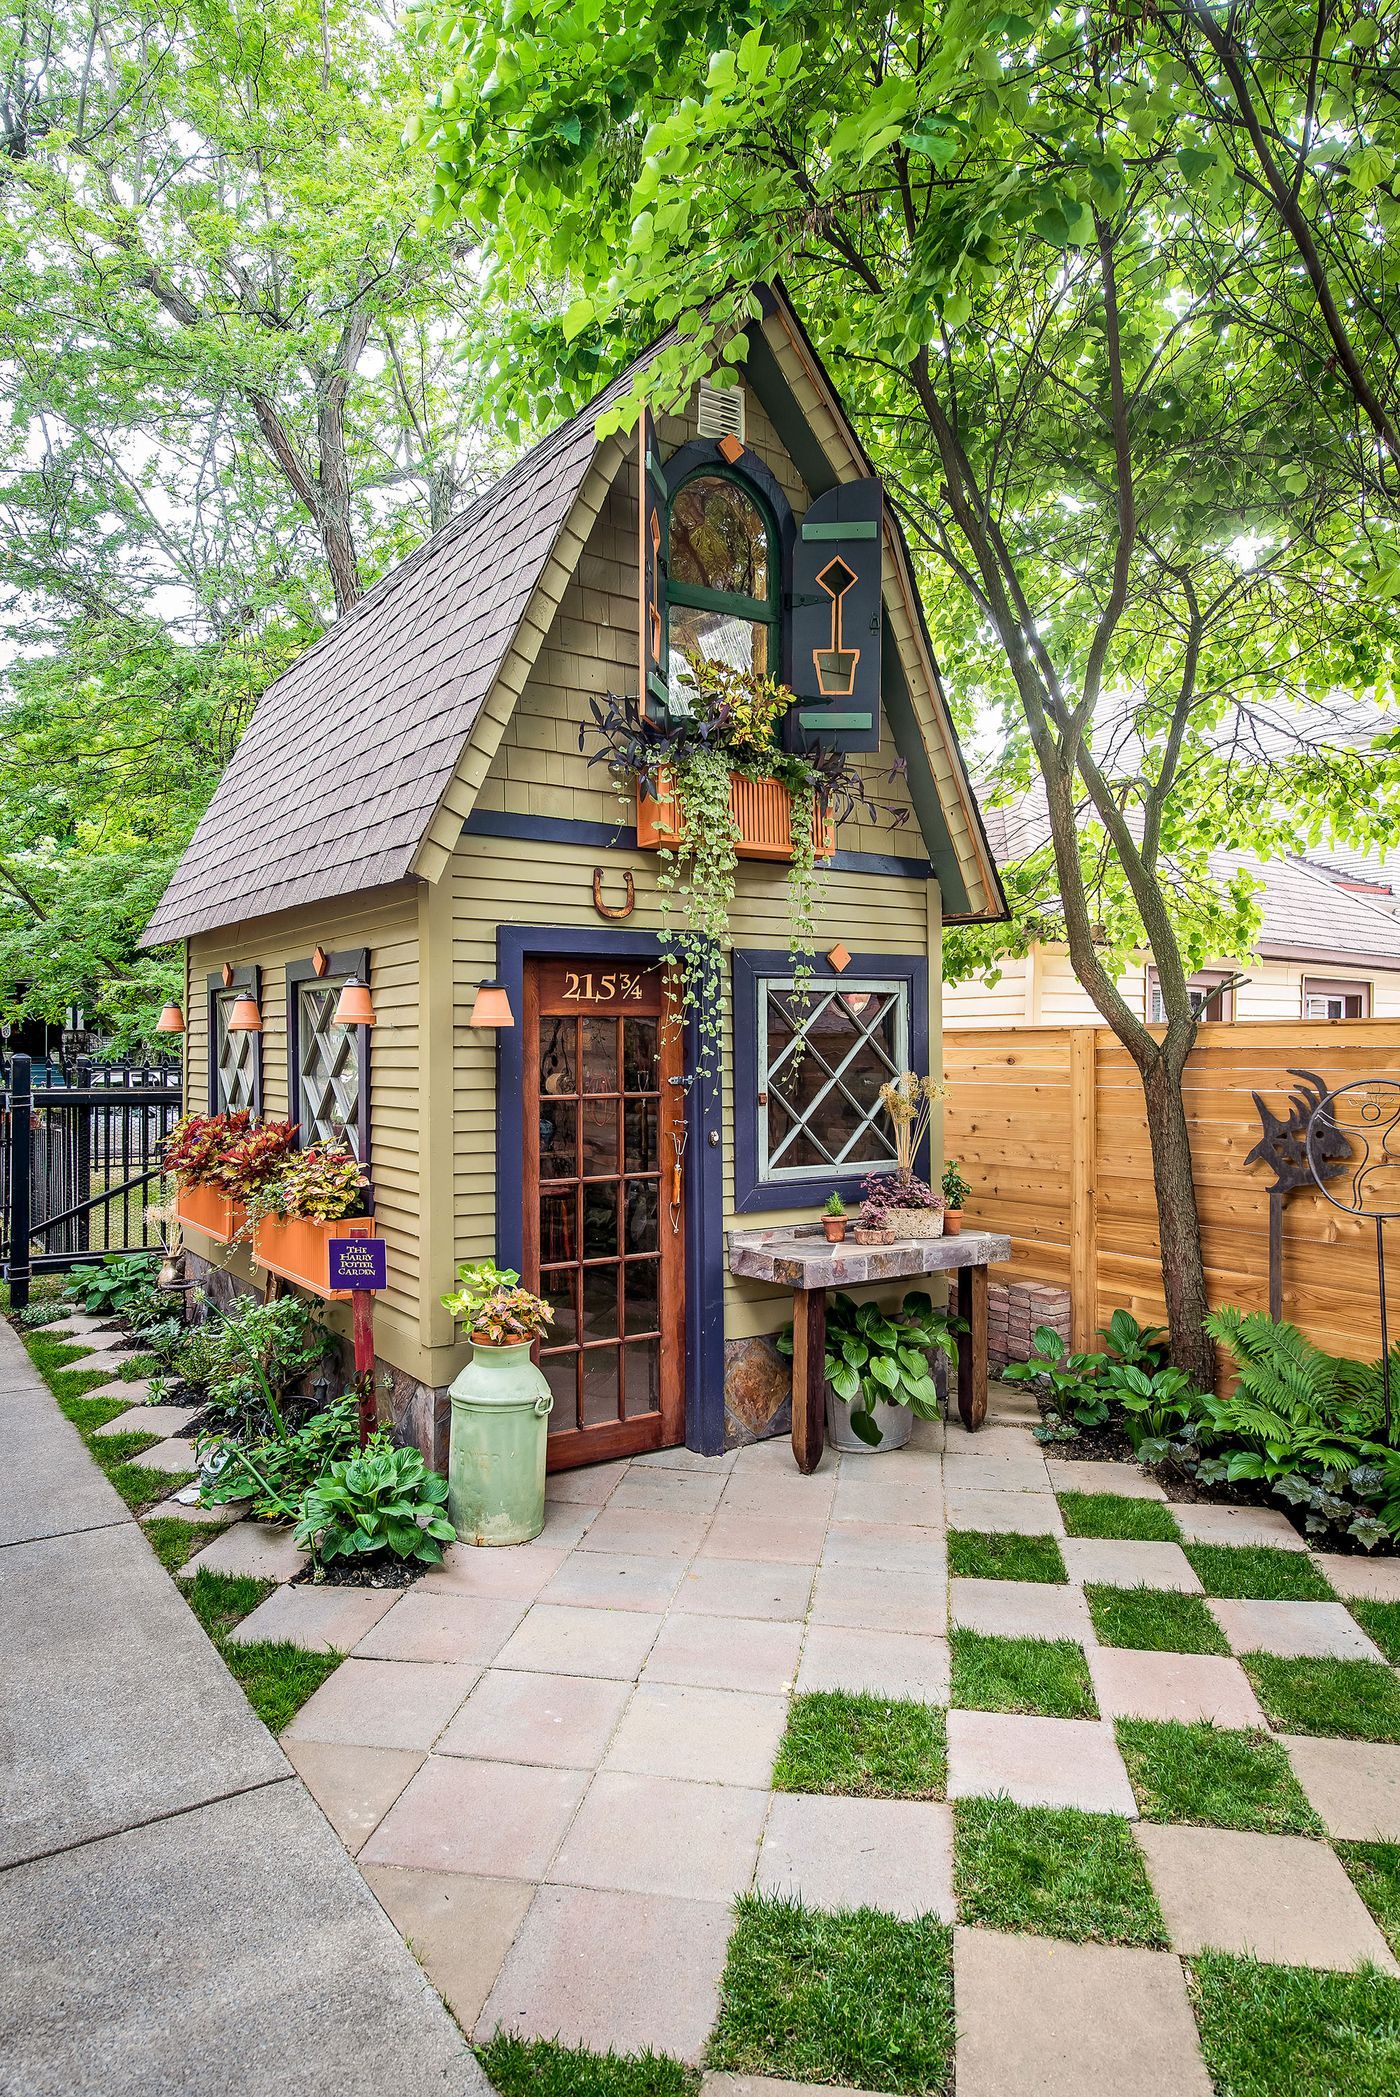 Tiny Abode: The Charm of Small Garden Houses